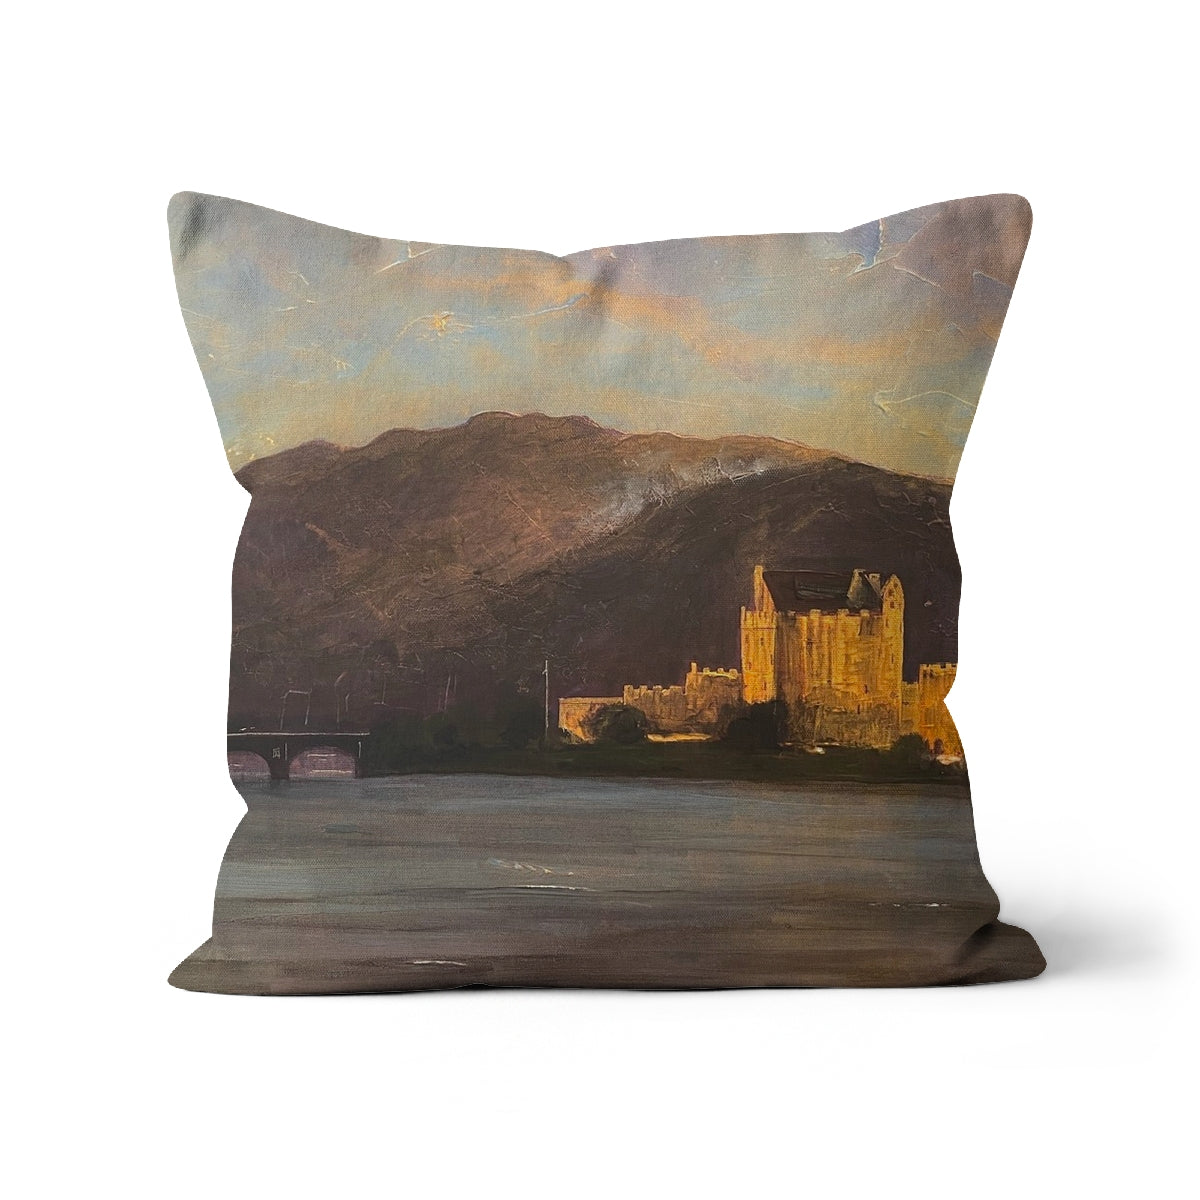 Eilean Donan Castle Art Gifts Cushion-Cushions-Historic & Iconic Scotland Art Gallery-Faux Suede-18"x18"-Paintings, Prints, Homeware, Art Gifts From Scotland By Scottish Artist Kevin Hunter